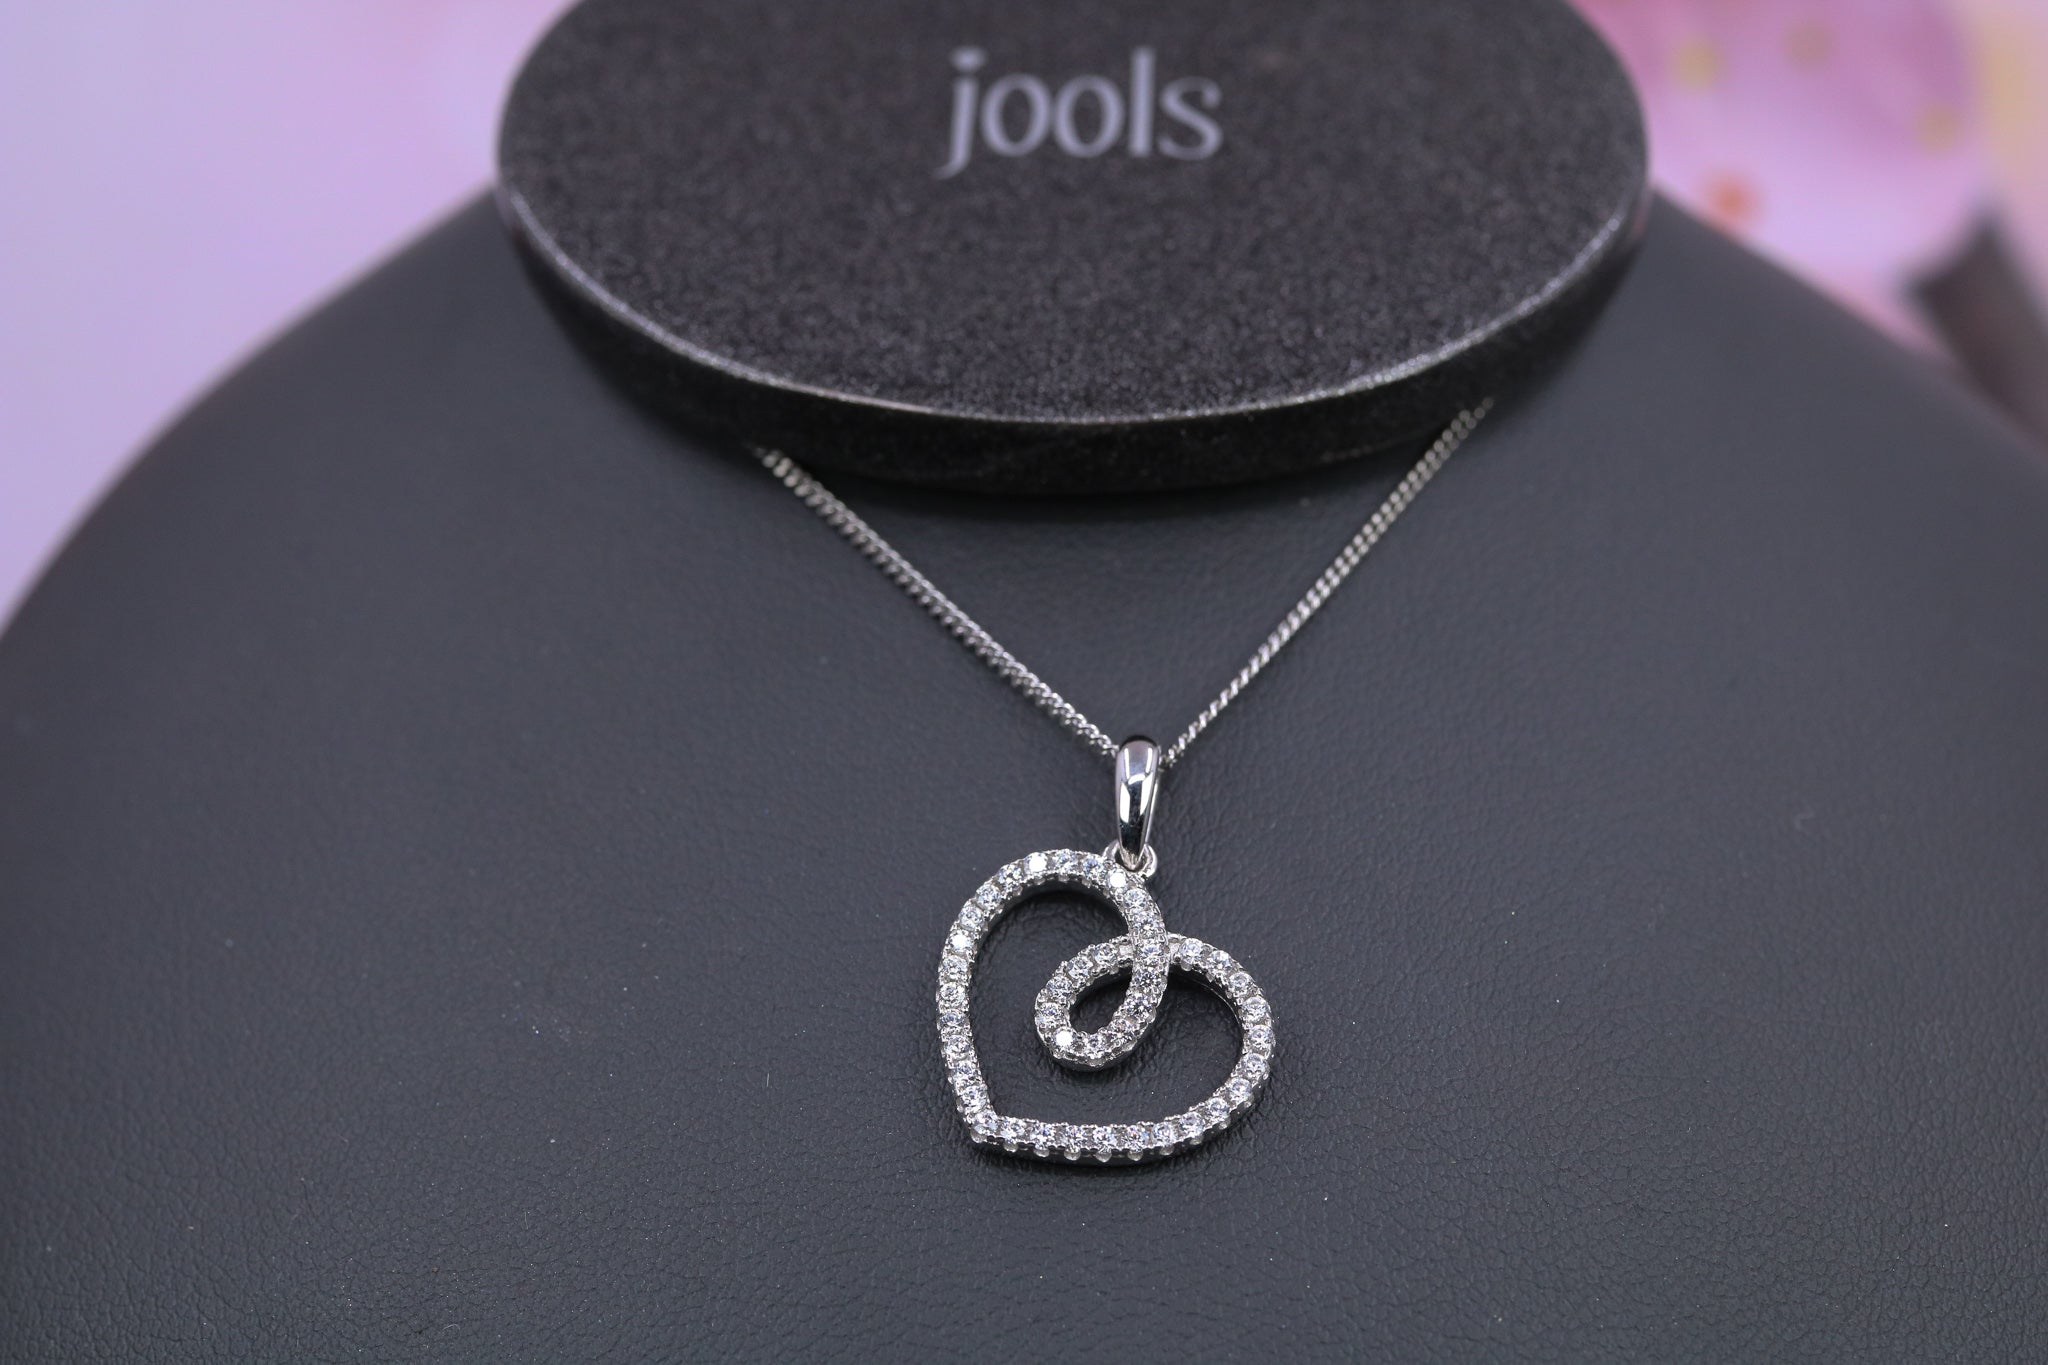 Jools Sterling Silver Pendant & Chain - JL1007 - Hallmark Jewellers Formby & The Jewellers Bench Widnes